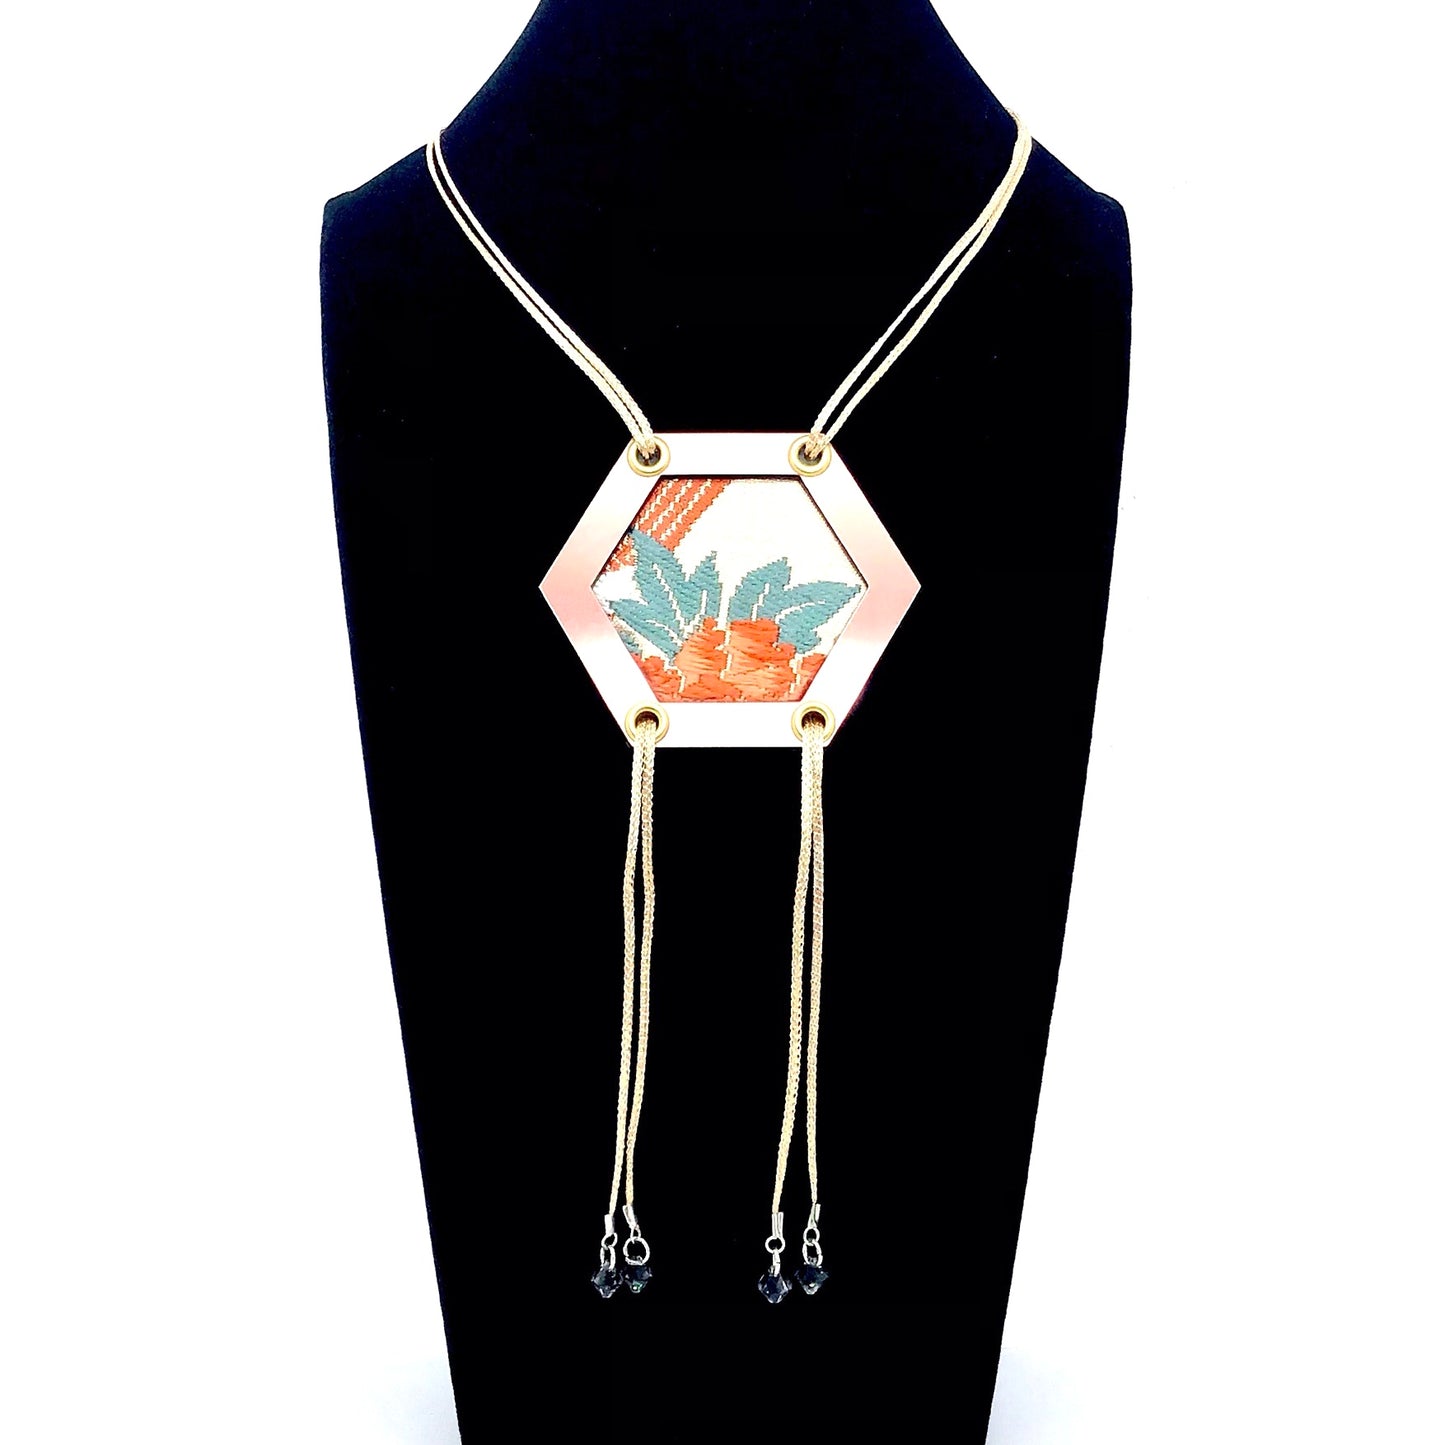 Abi-K Statement Necklace ‘Teal Coral’ 1/2